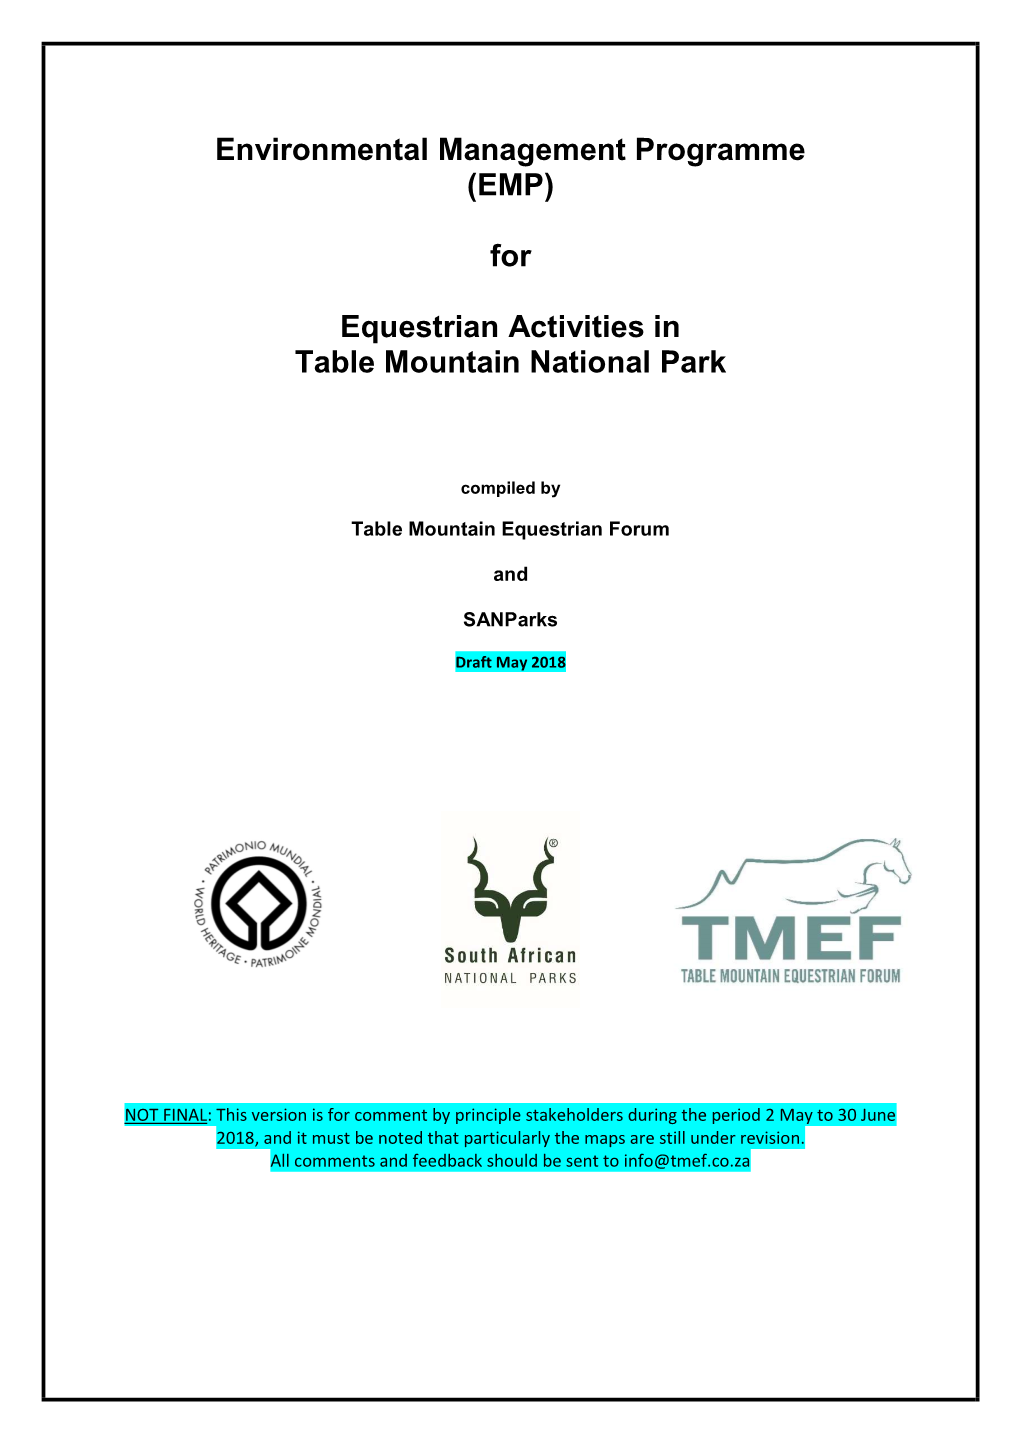 (EMP) for Equestrian Activities in Table Mountain National Park